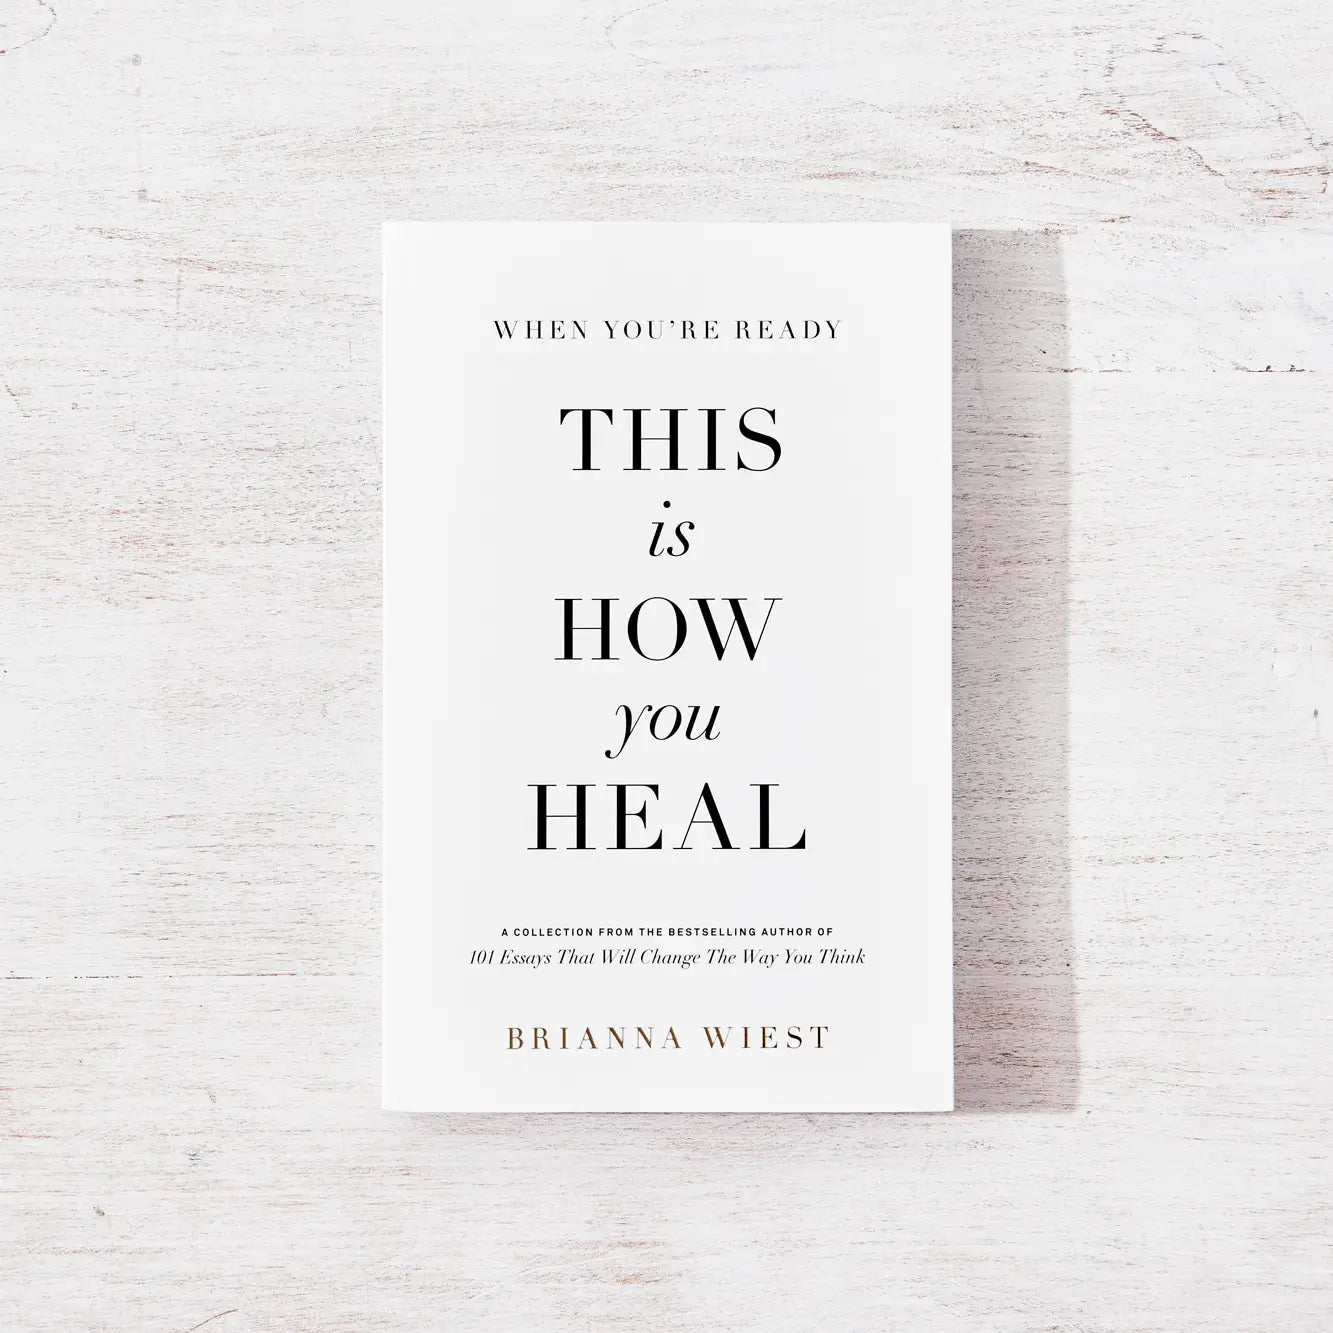 When Your're Ready This Is How You Heal, by Brianna Wiest